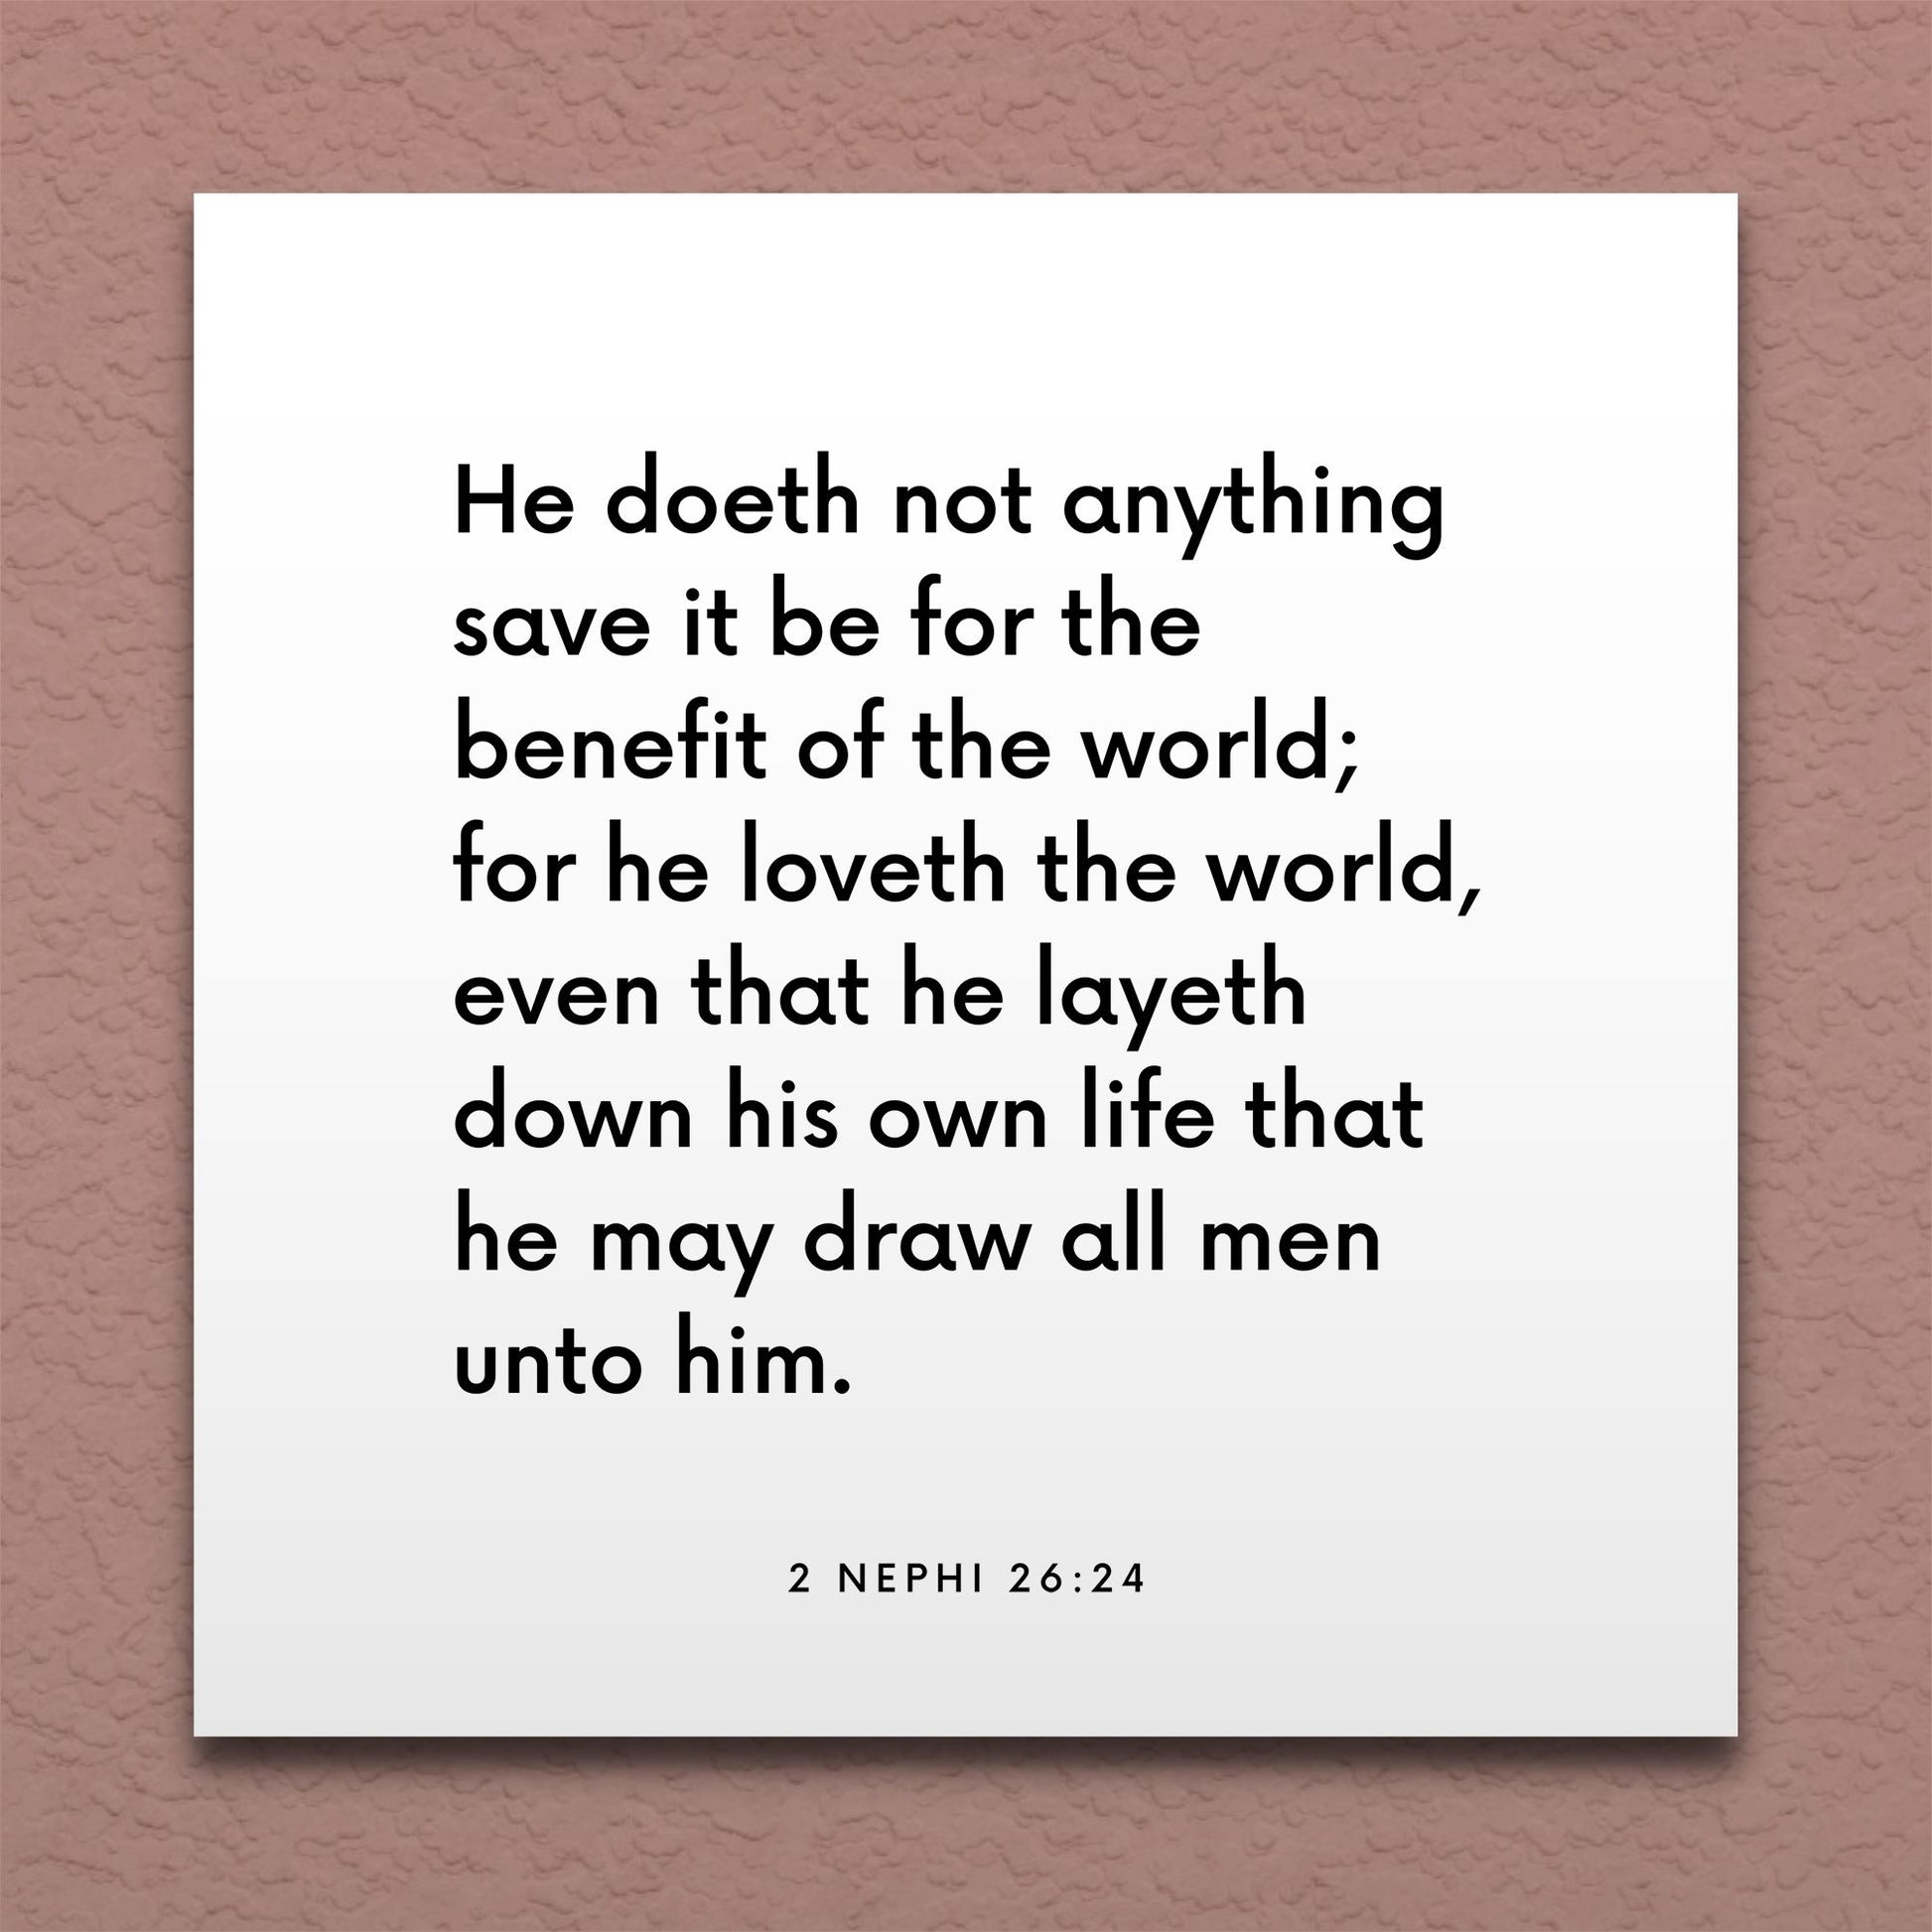 Wall-mounted scripture tile for 2 Nephi 26:24 - "He loveth the world, even that he layeth down his own life"